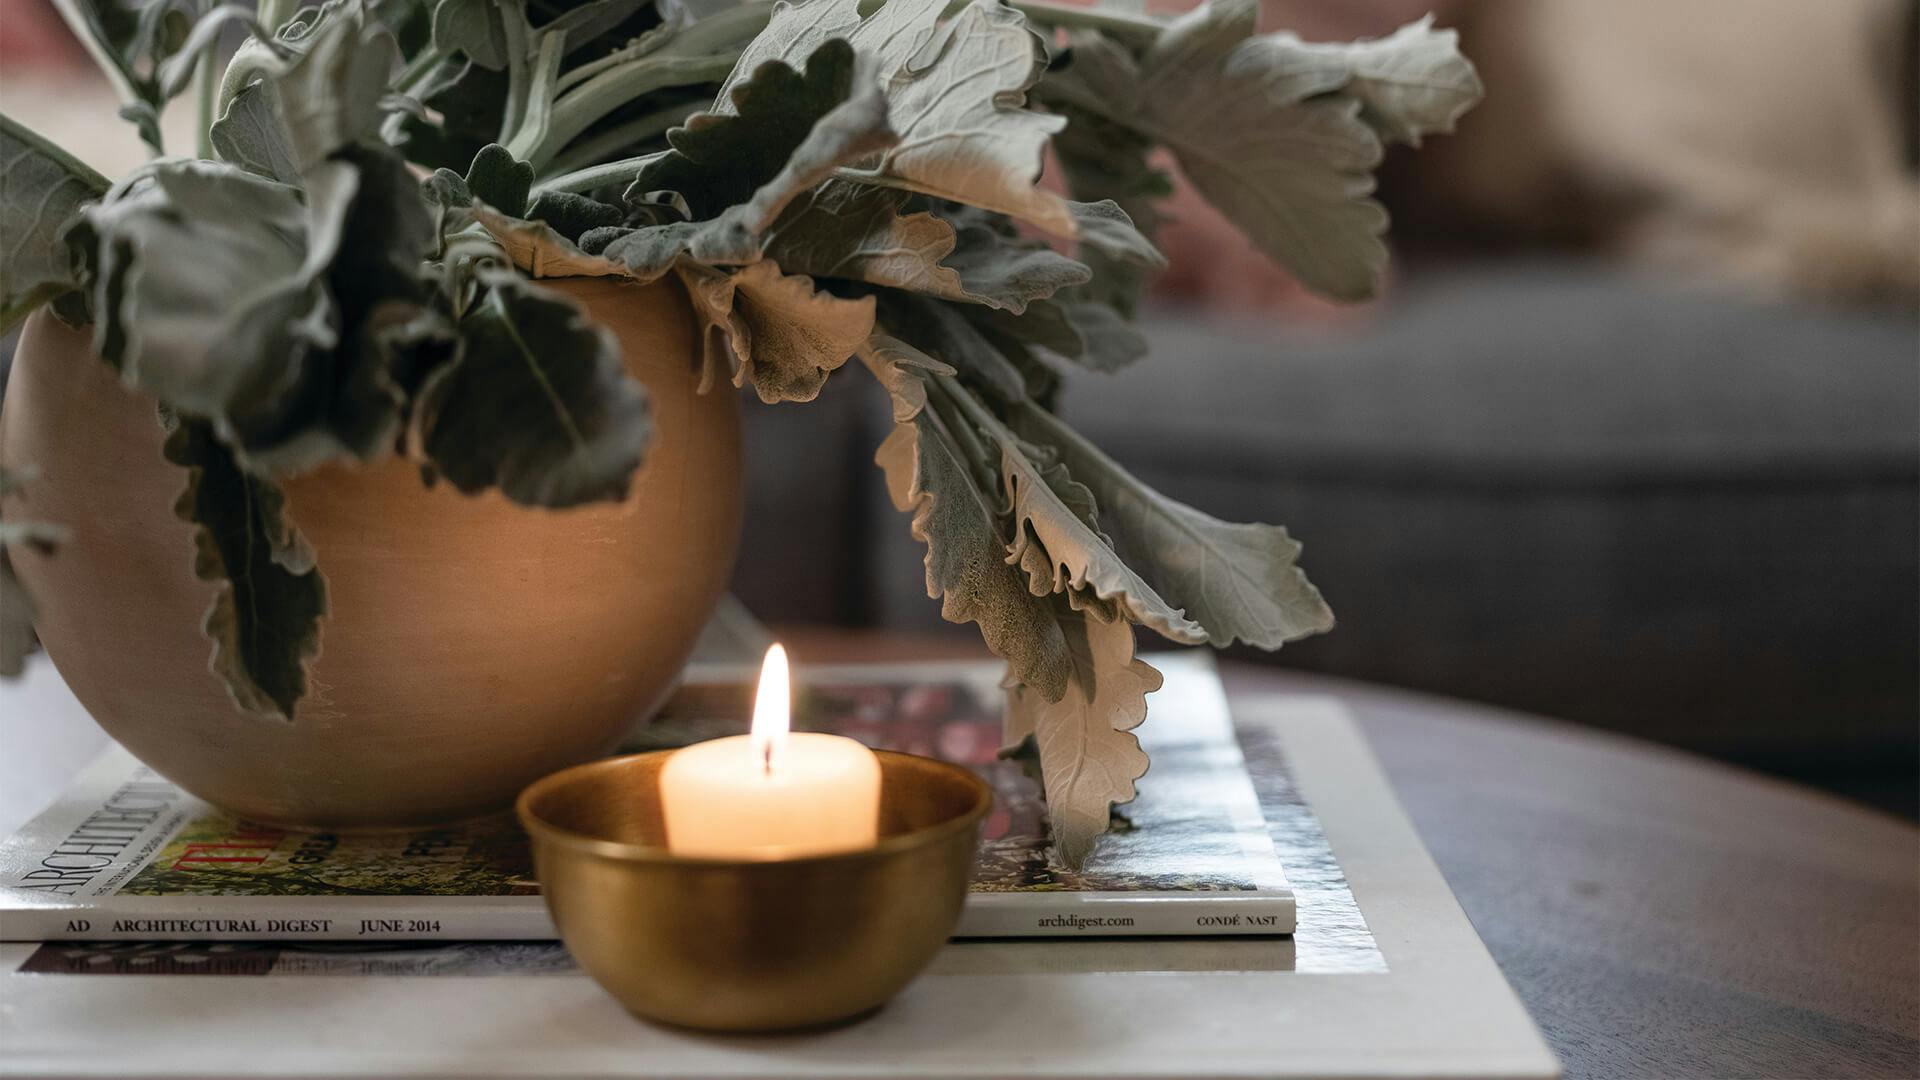 Lifestyle shot of a coffee table with a candle. books, and a plant in a vase 